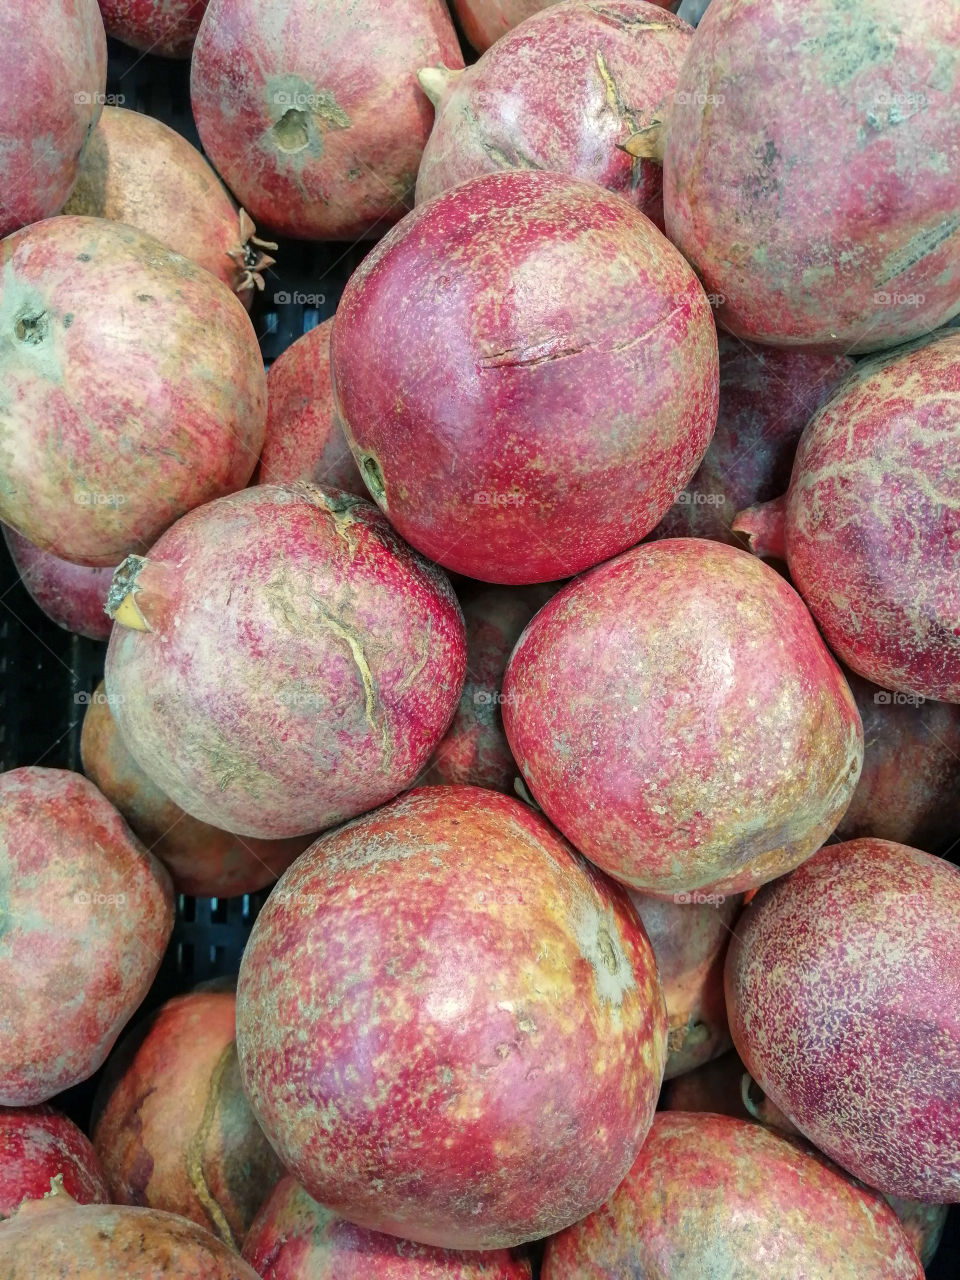 Bulk big pomegranates for sale in a grocery store